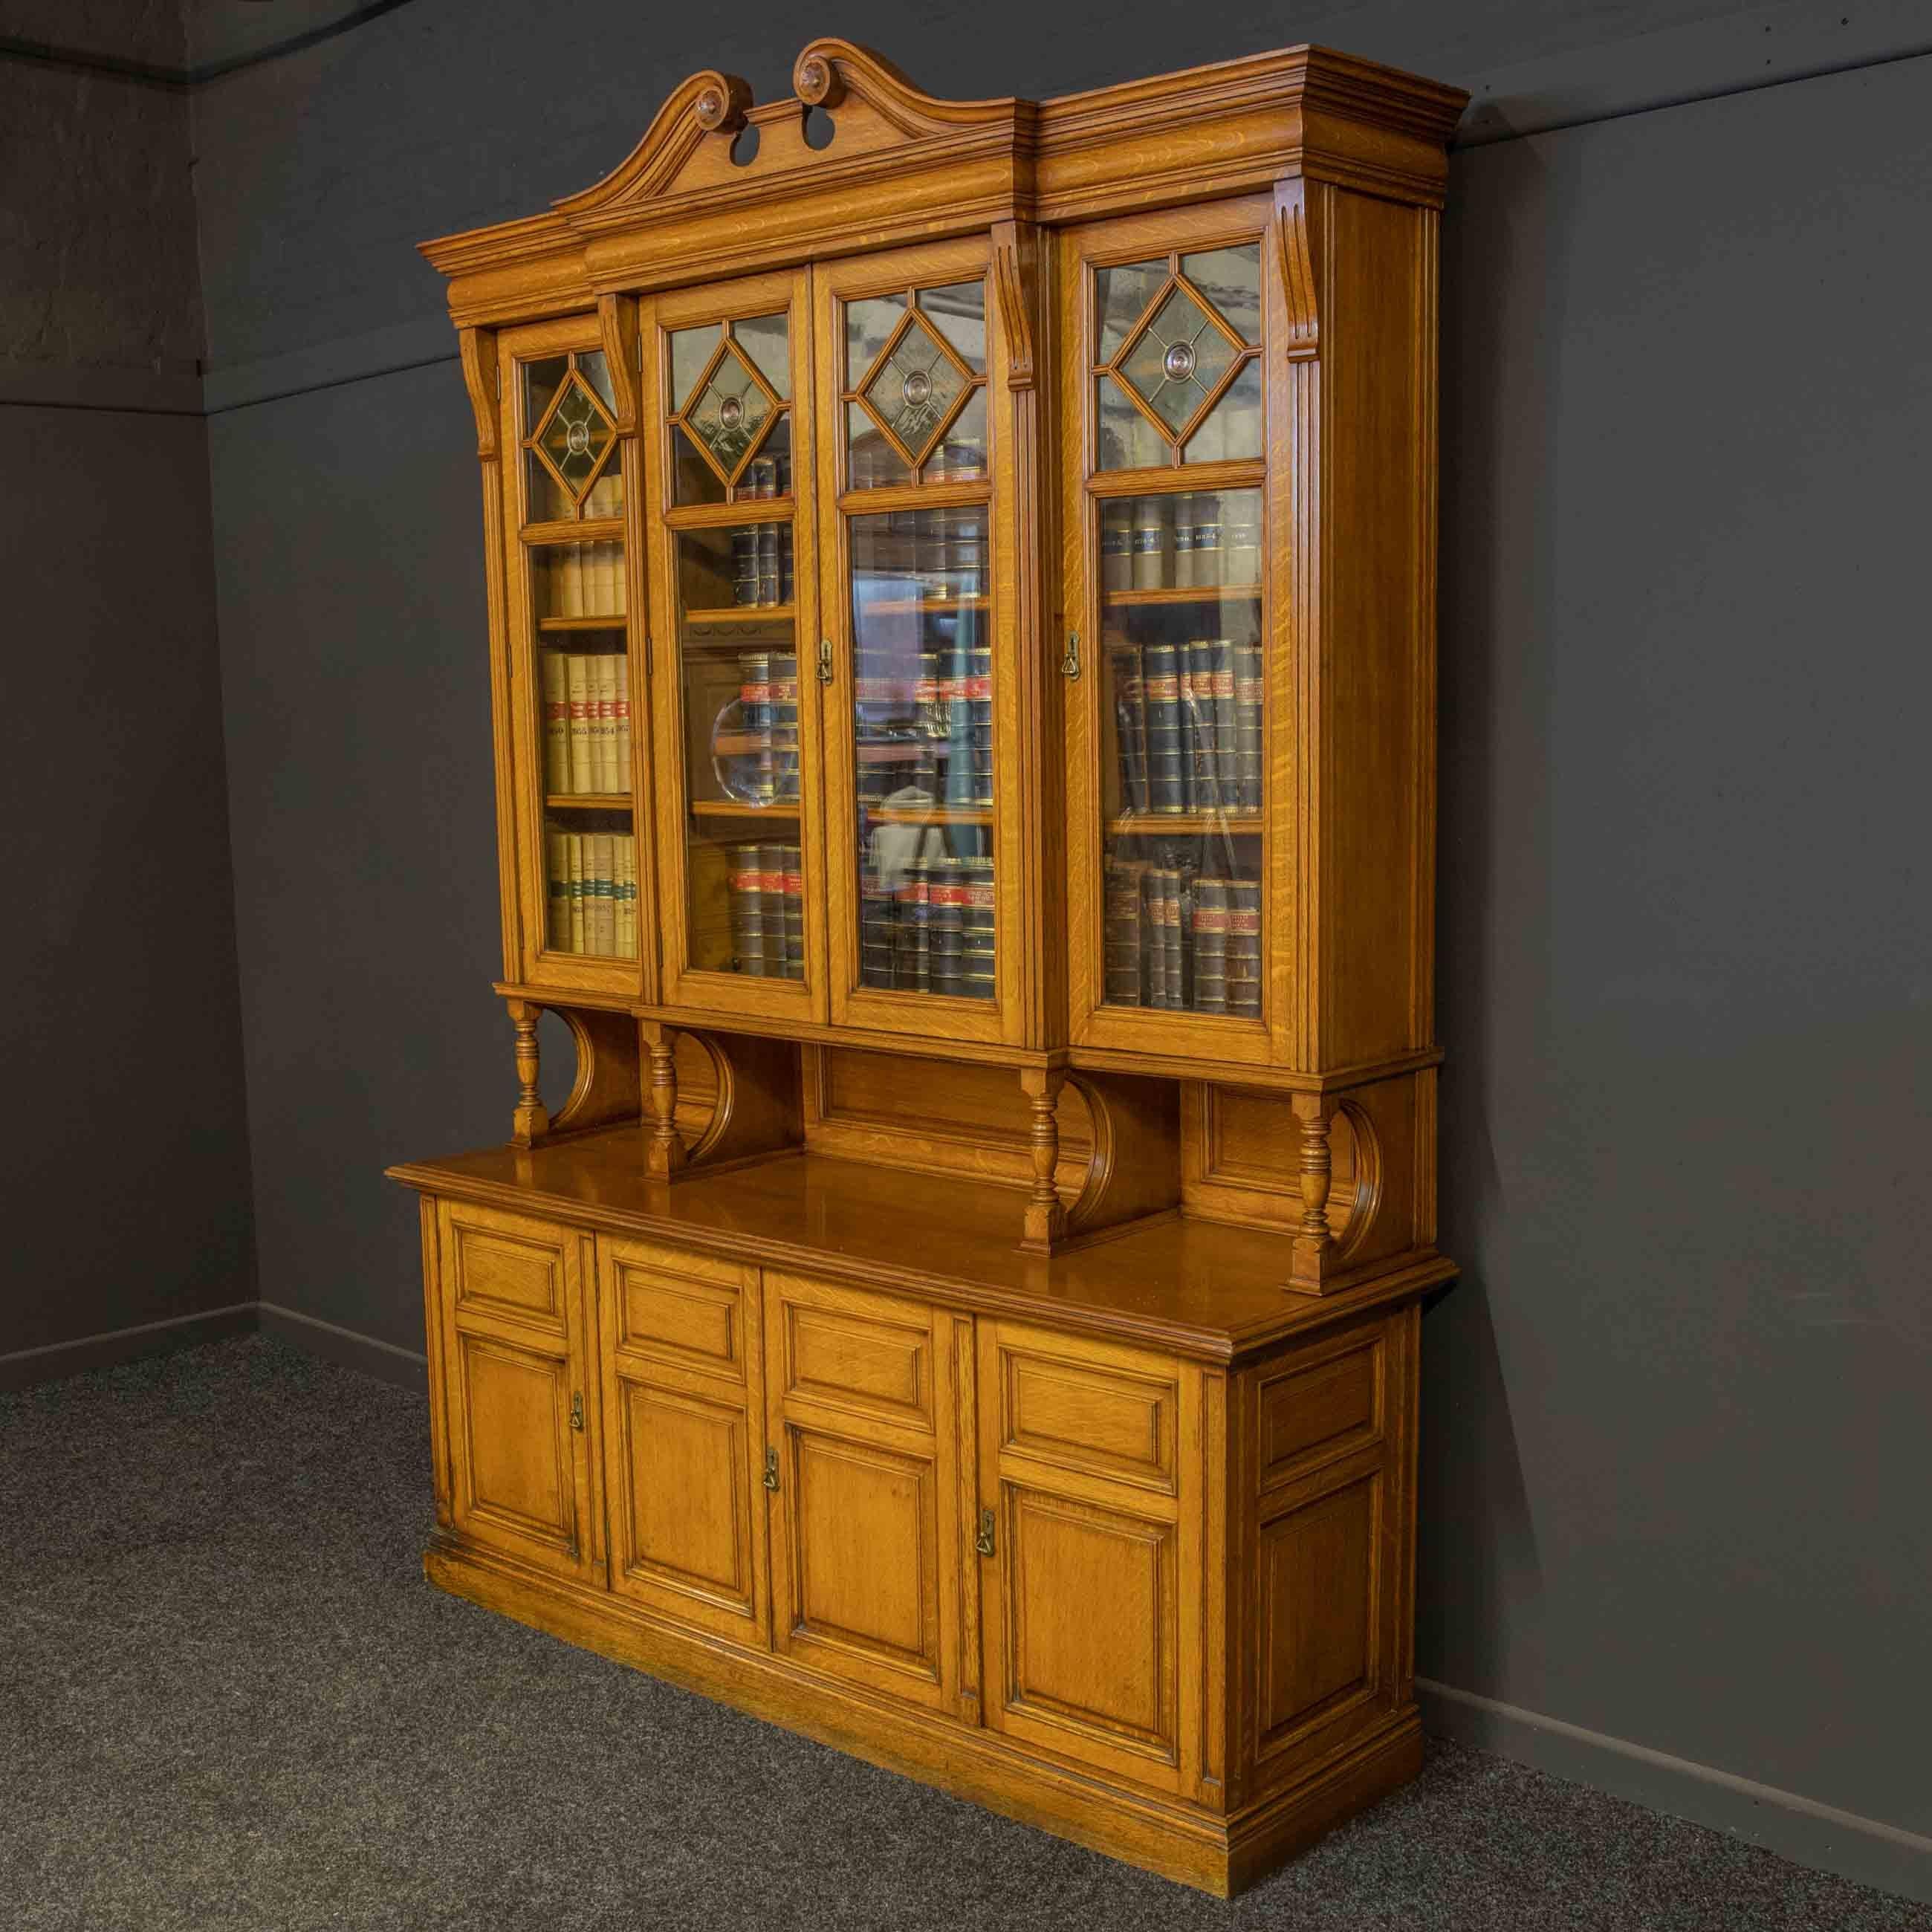 The upper structure of this bookcase is of breakfront design with a superb swan neck pediment to it's ogee shaped cornice. The astragal glazed doors have a diamond shaped leaded window to the upper most section complete with a central 'bullseye'.